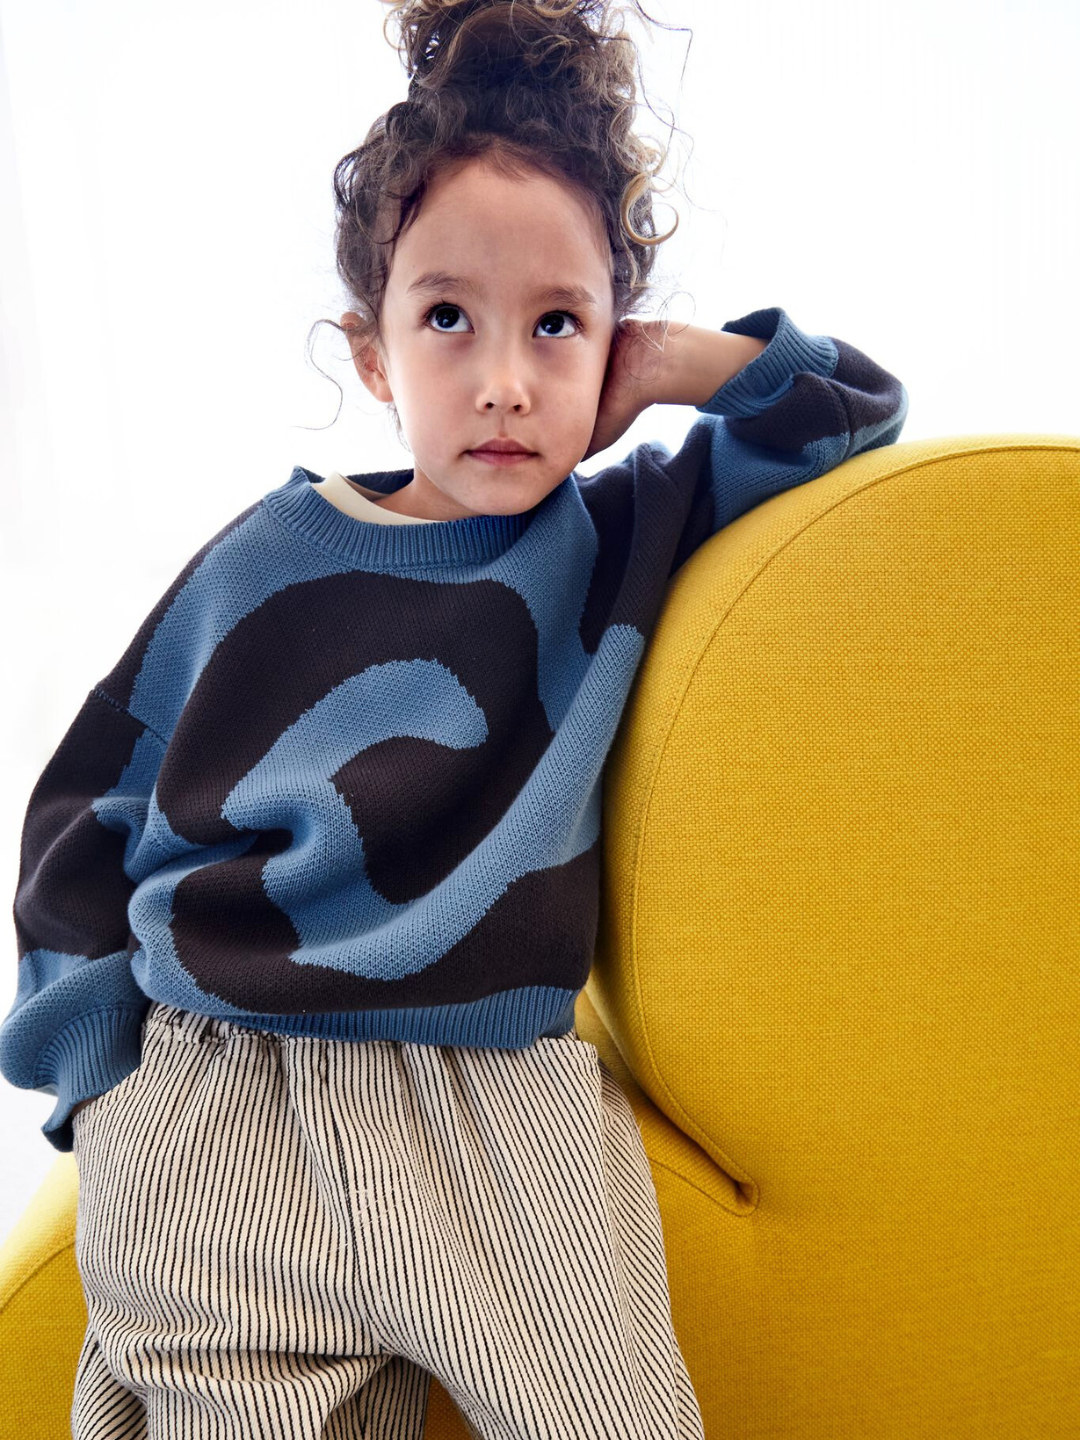 Slate | A child wearing a kids crewneck sweater in medium blue, with a large single charcoal grey swirl design that covers the entire sweater. She is seated on a yellow chair and wearing white pants with a thin black stripe.